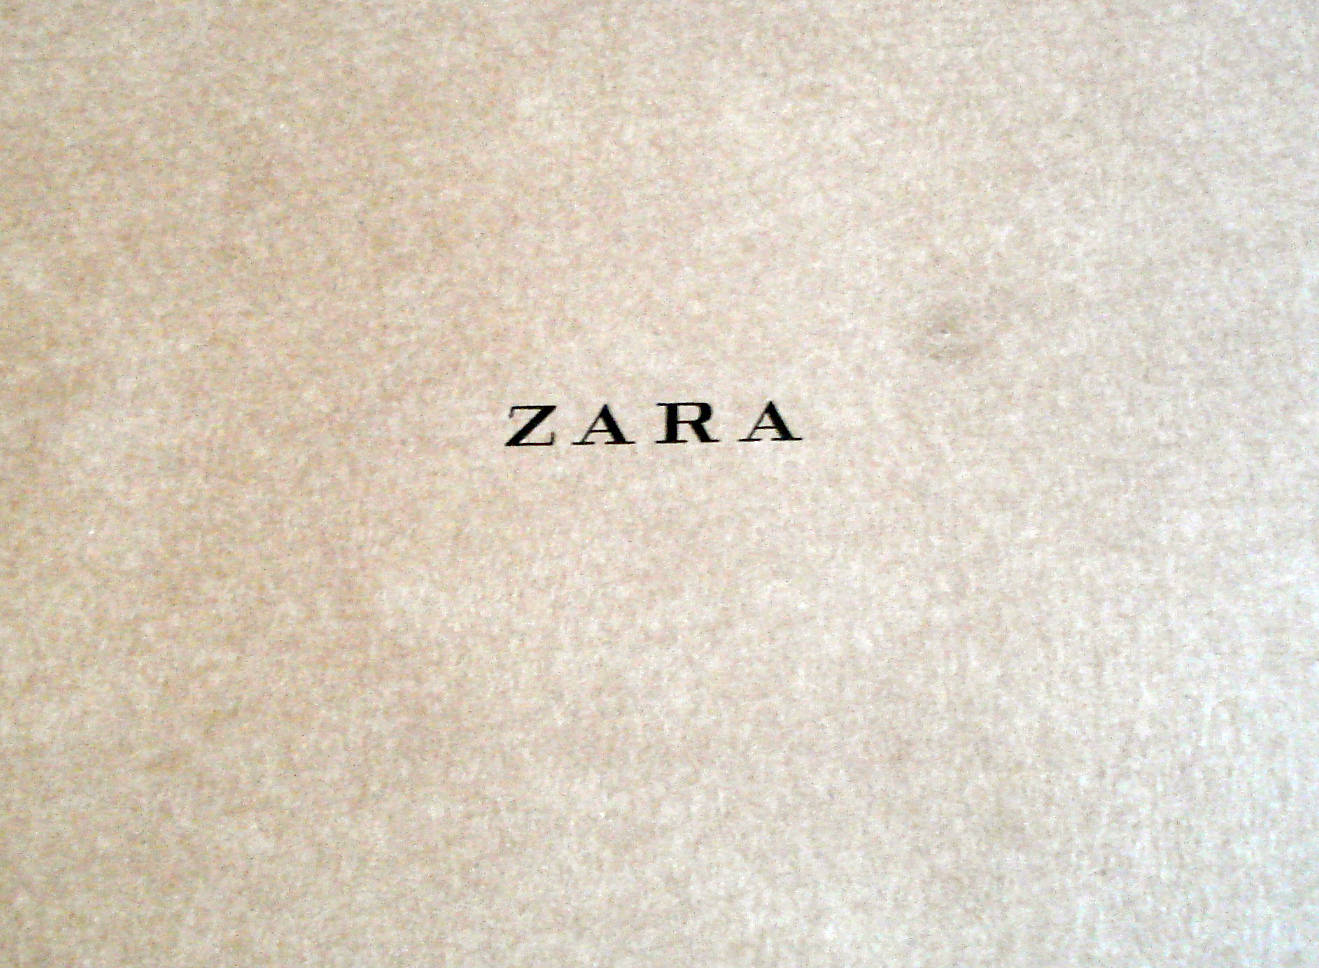 Zara's Fashionable Women's Outfit Collection Wallpaper